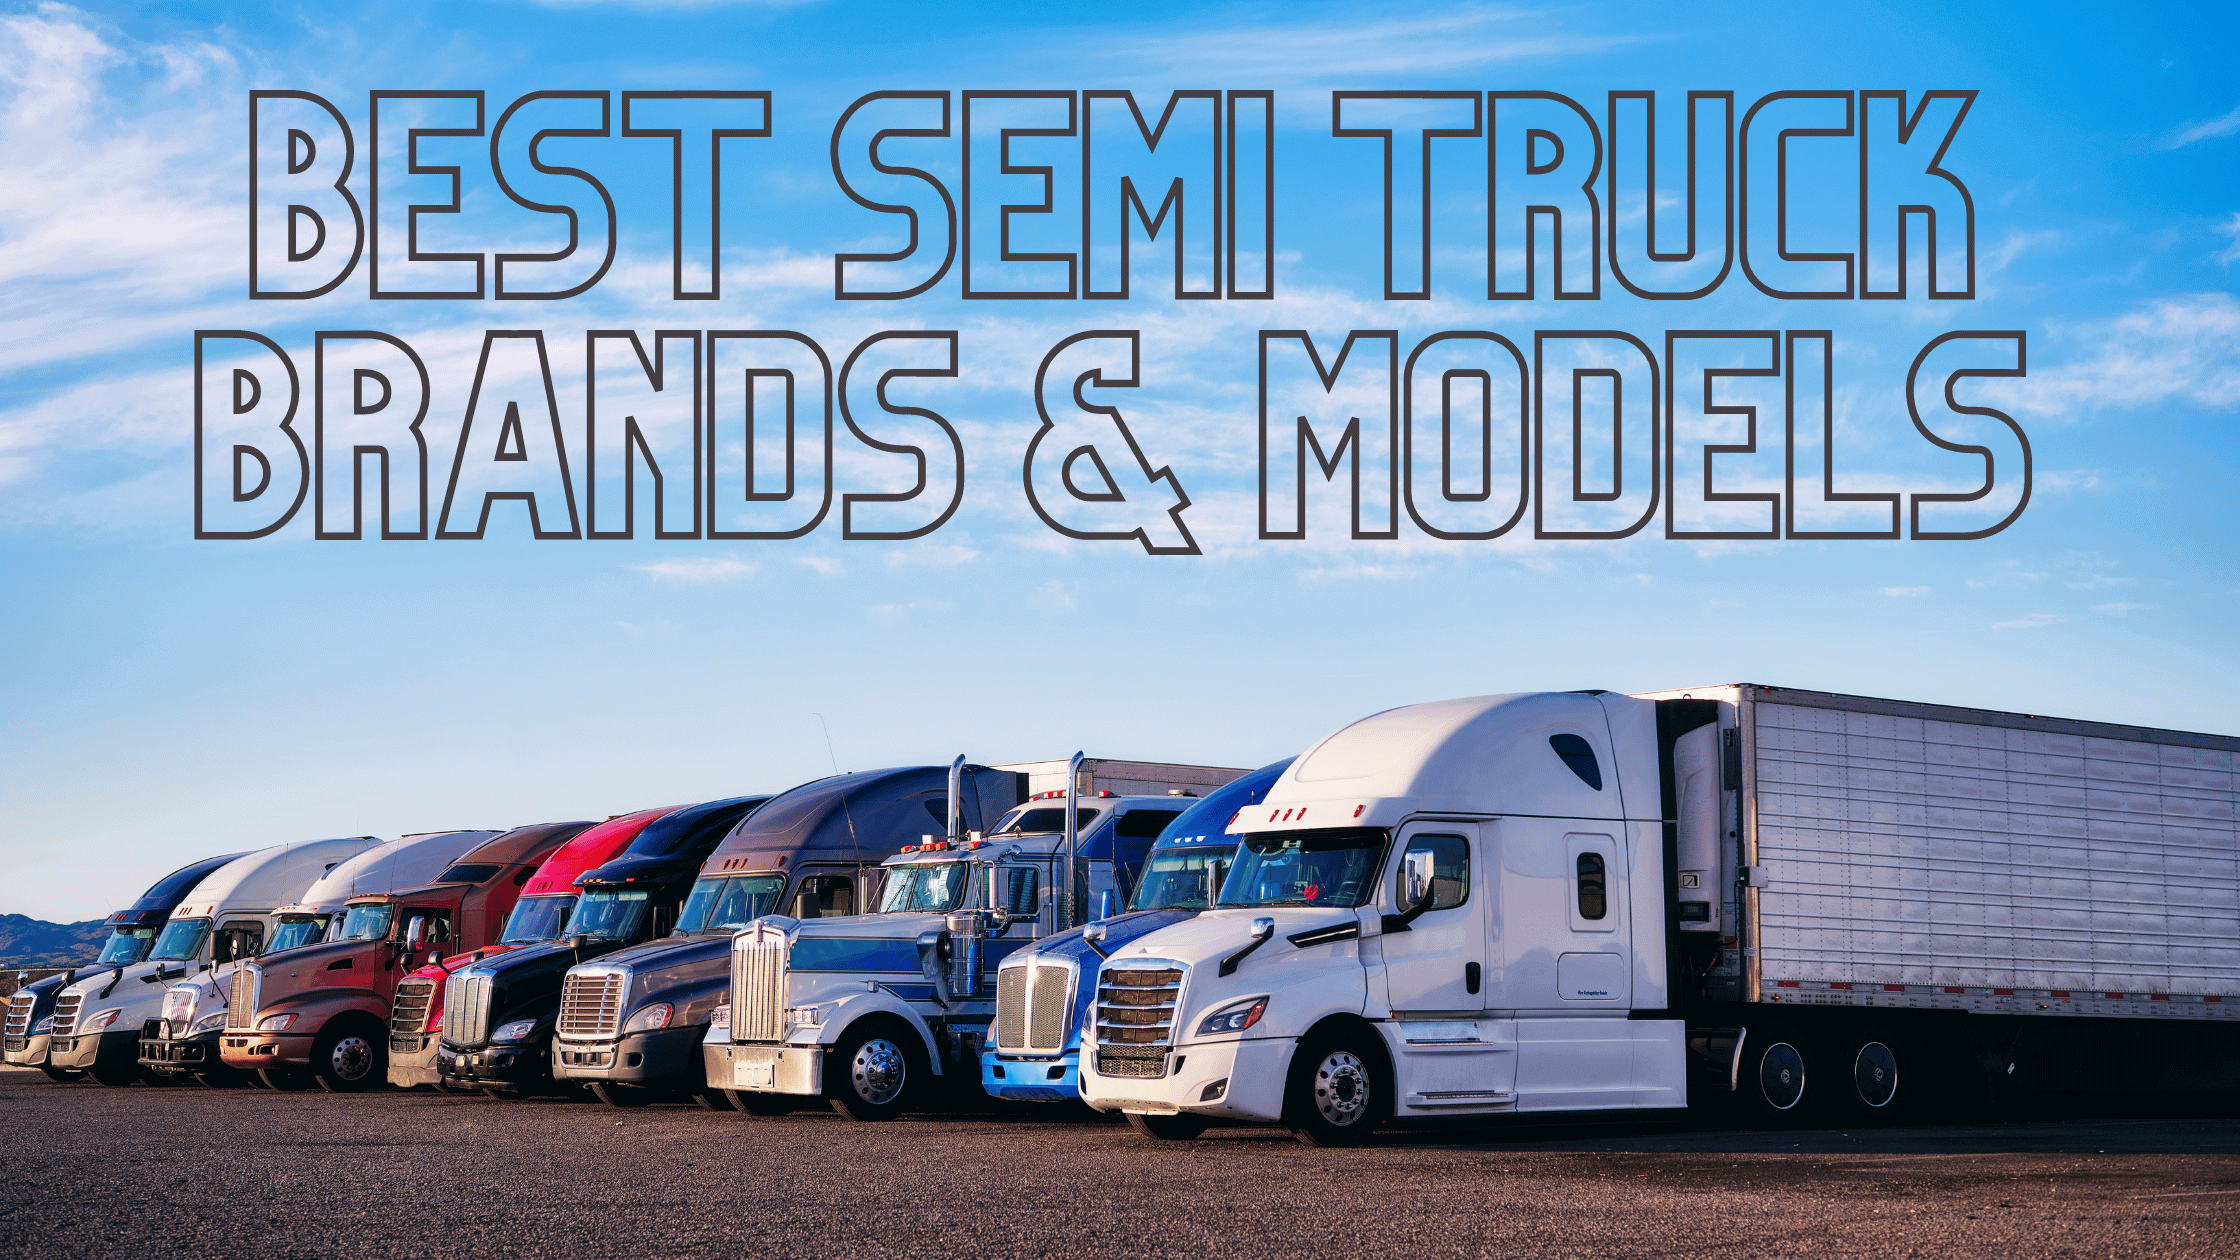 Different semi trucks parked outdoors with a text caption "Best Semi Truck Brands & Models"